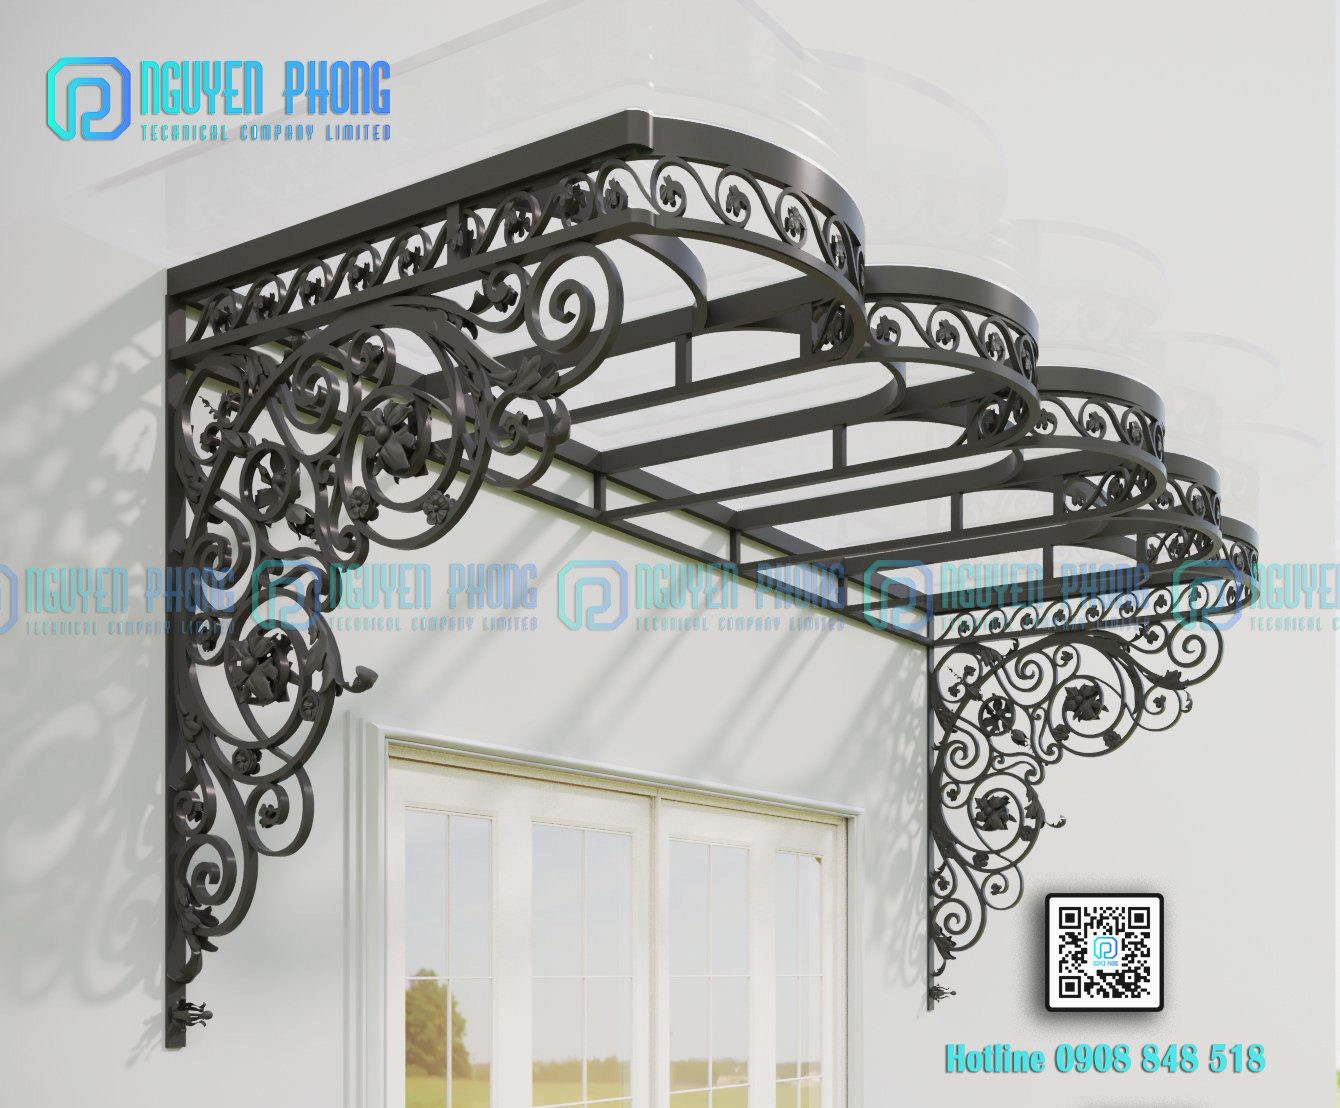 steel-canopy-wrought-iron-glass-canopy-wrought-iron-canopy-7.jpg